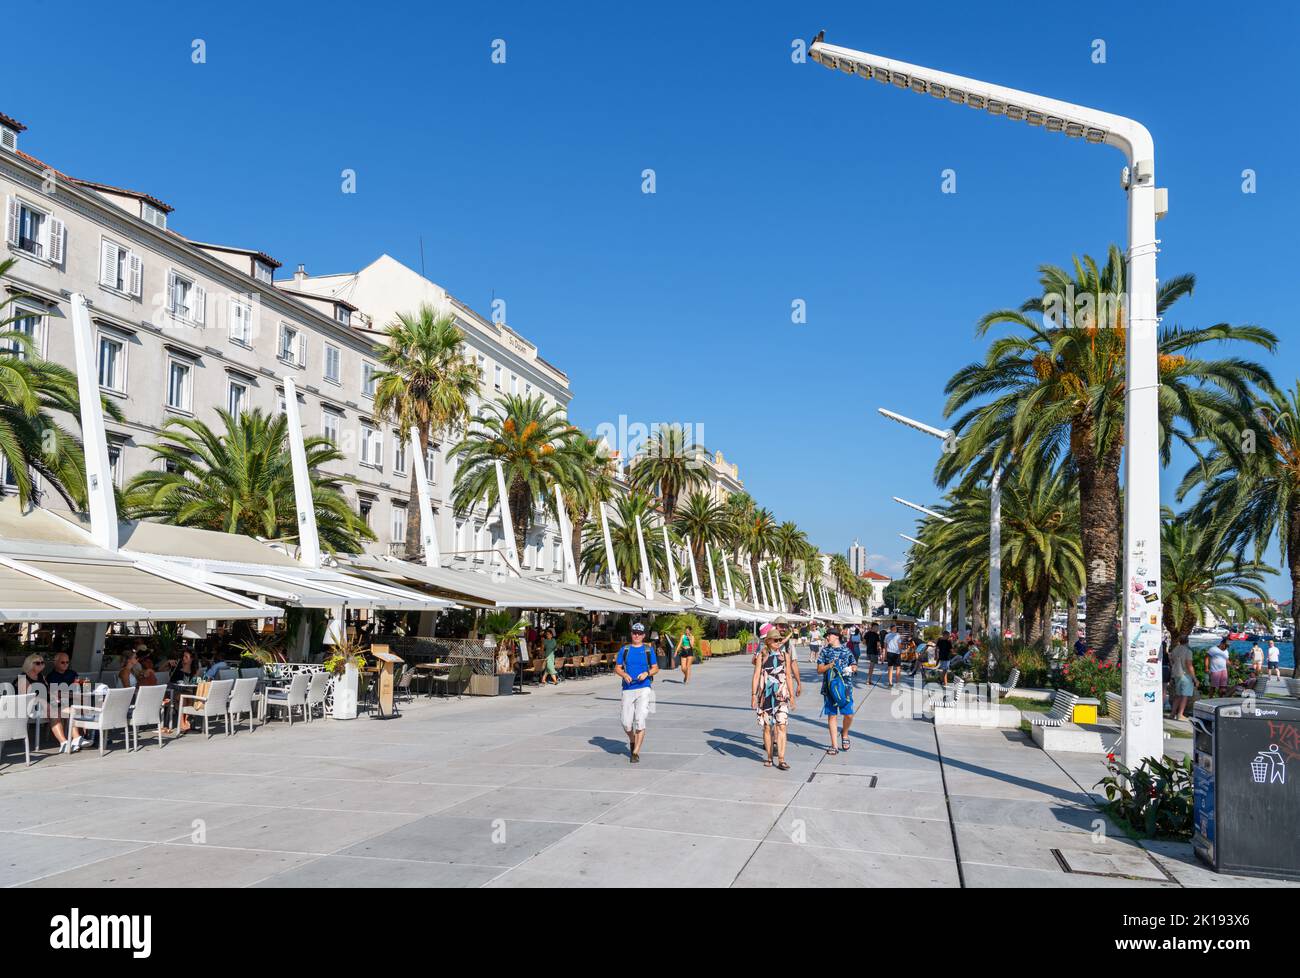 Cafes and bars on Obala Hrvatskog narodnog preporoda, a street on the waterfront in the old town of Split, Croatia Stock Photo